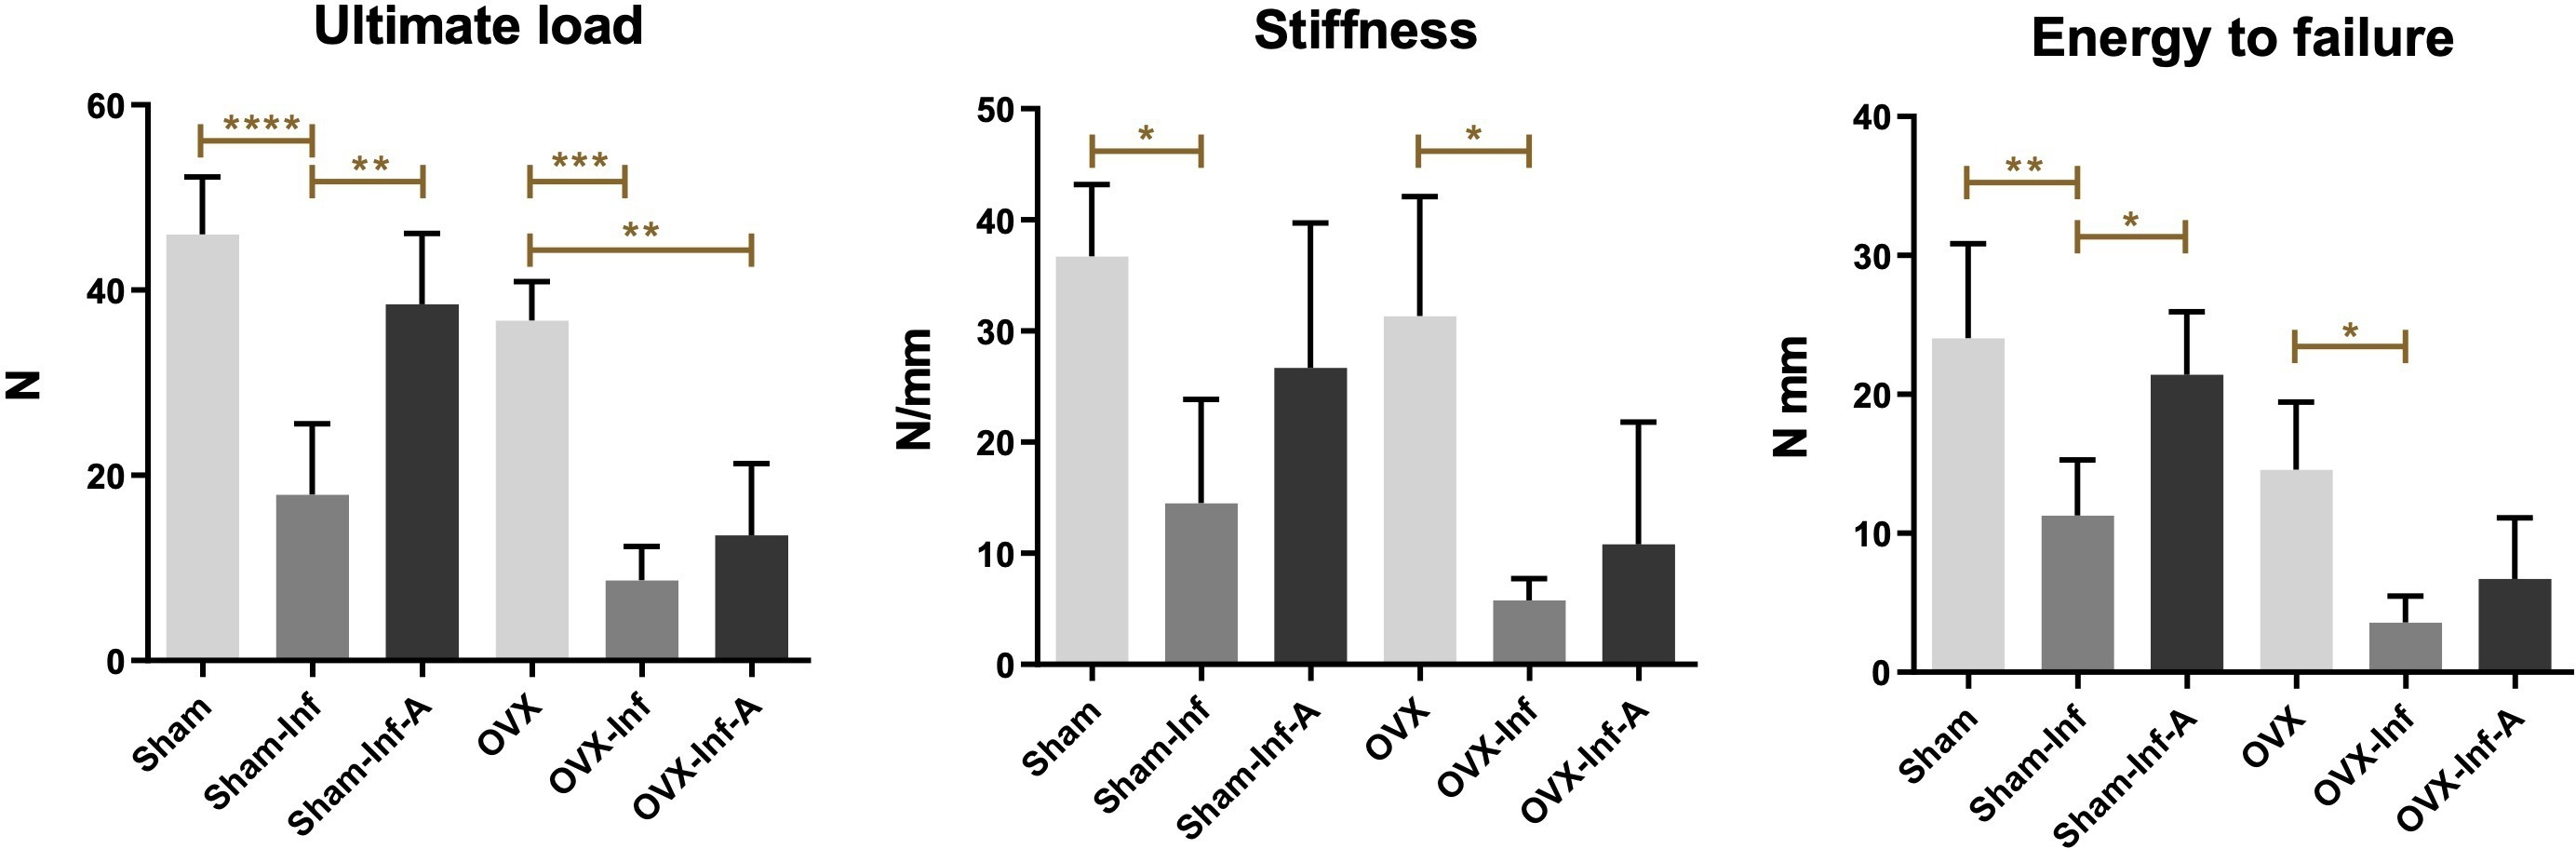 Fig. 9 
            Comparison of ultimate load, stiffness, and energy to failure in the mechanical test among six groups at week 8. A, antibiotics; Inf, infection; OVX, ovariectomized. *p < 0.05; **p < 0.01; ***p < 0.001; ****p < 0.0001.
          